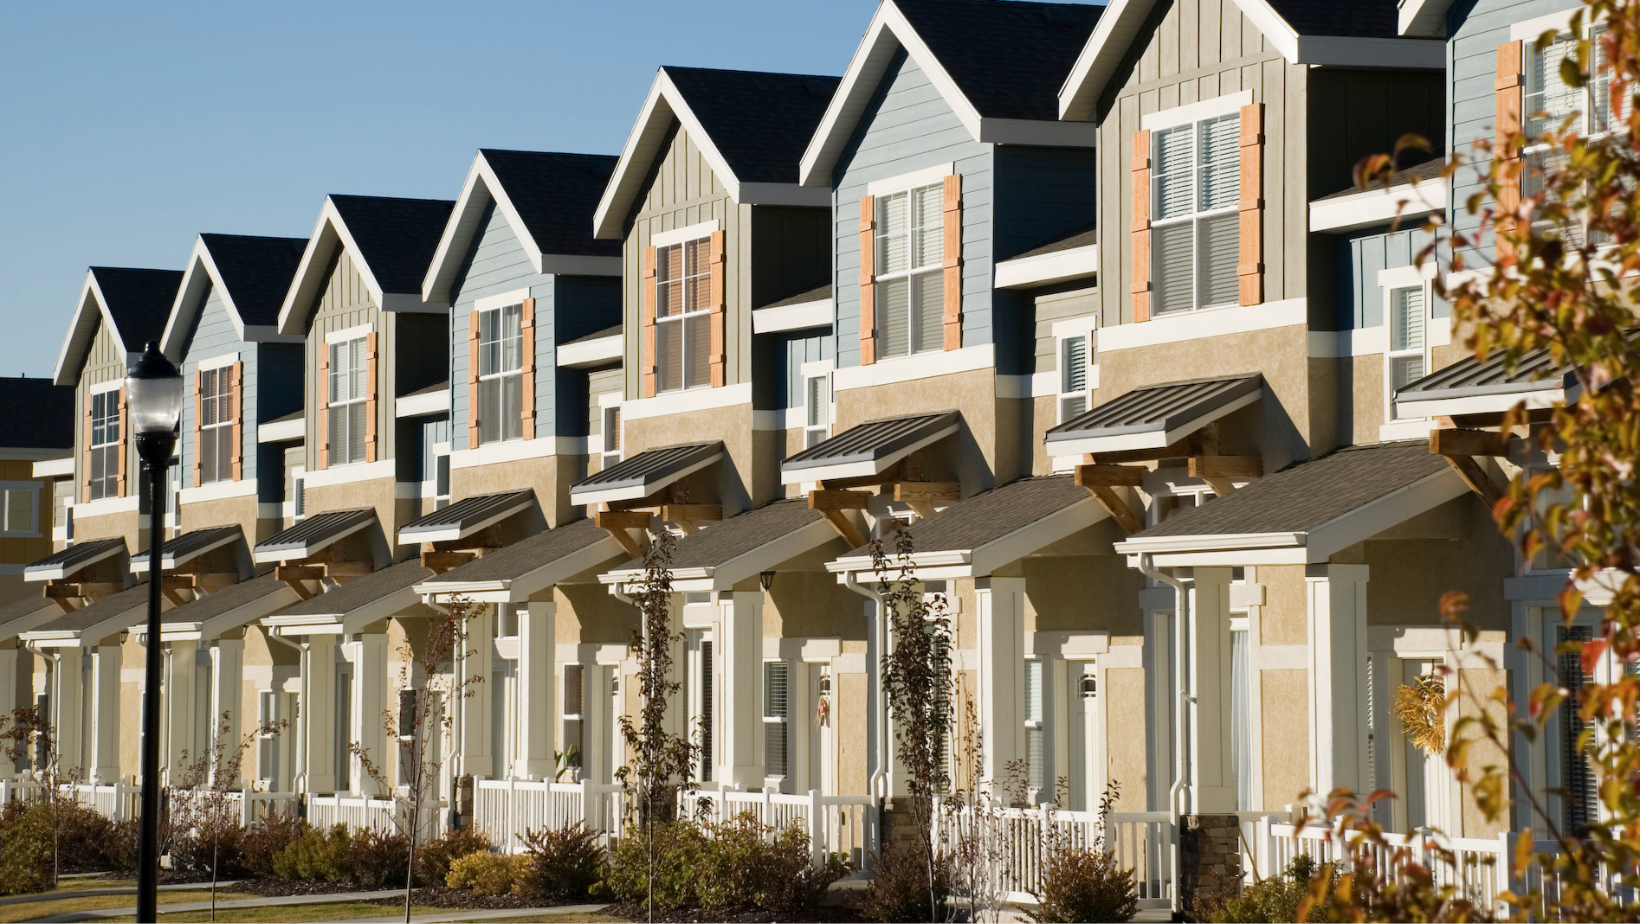 A row of townhomes